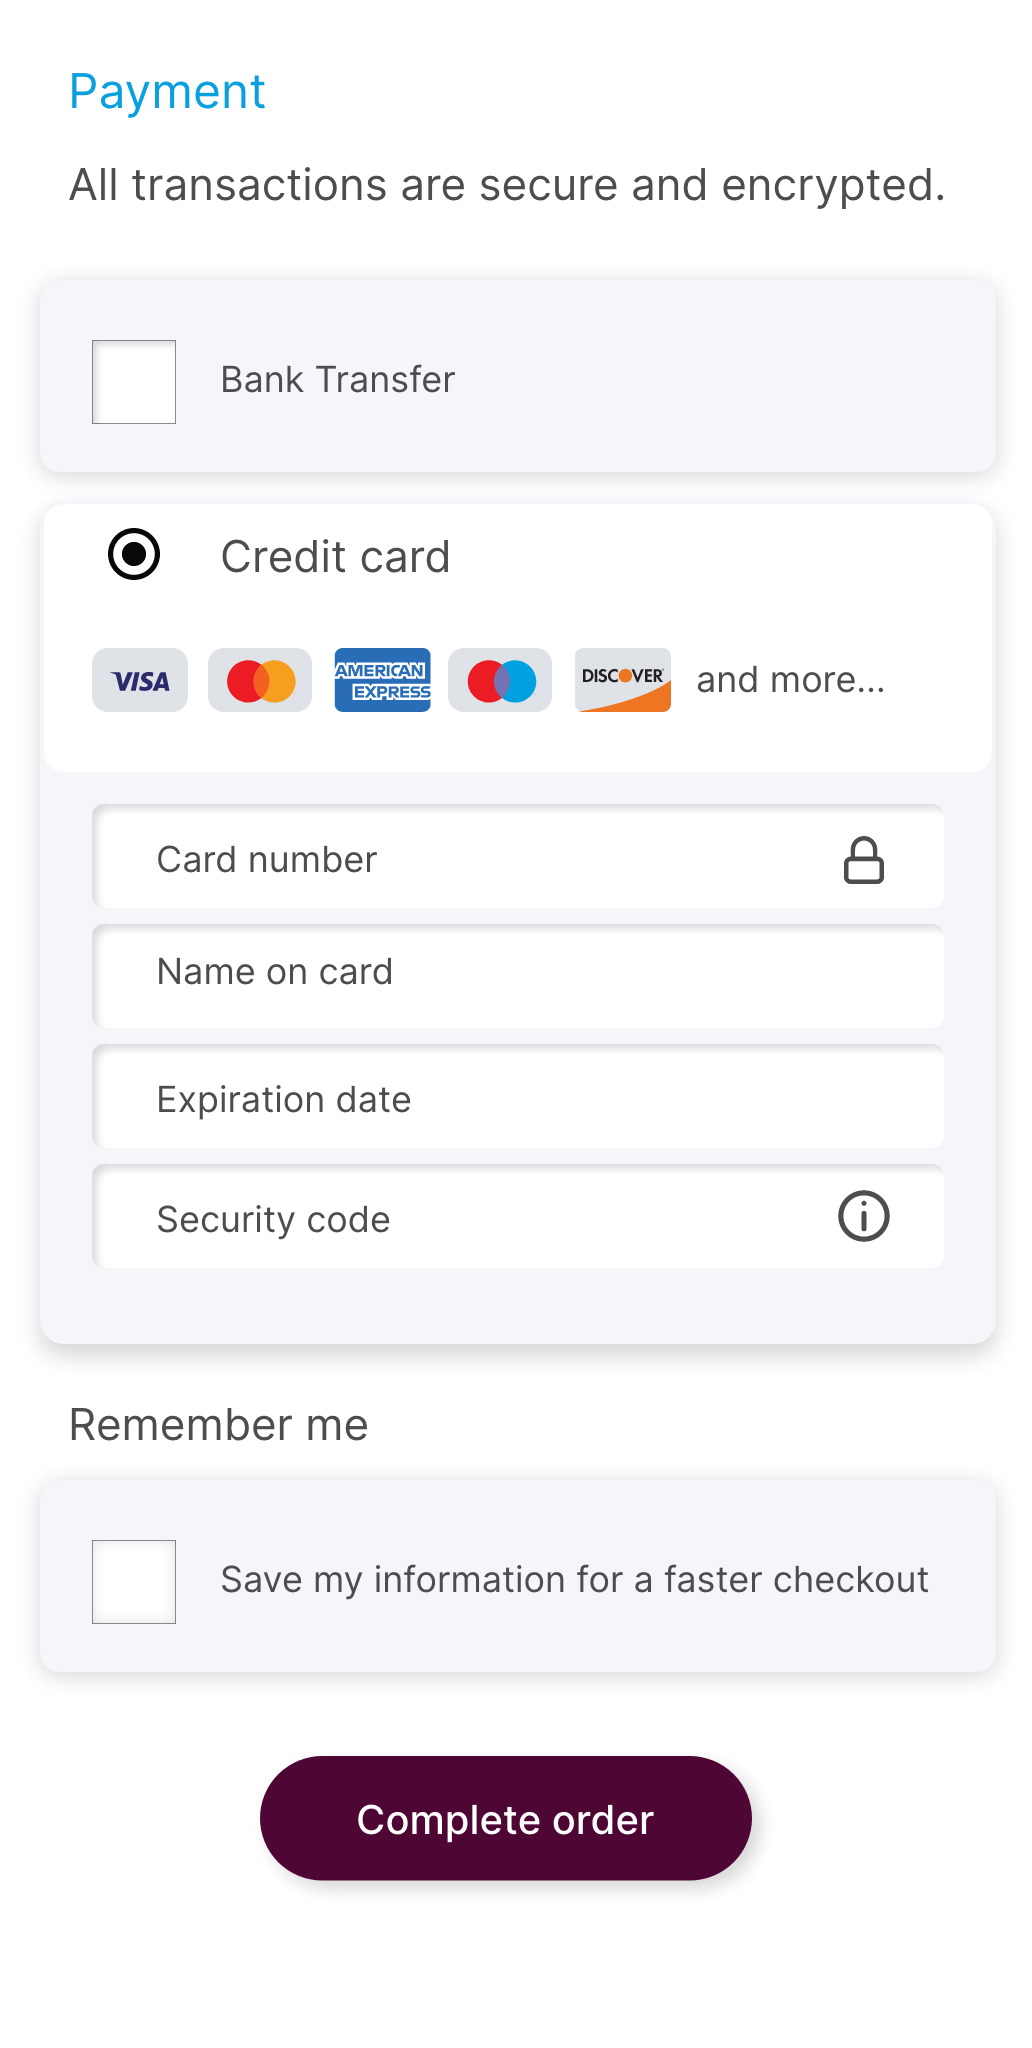 Payment payment order screen